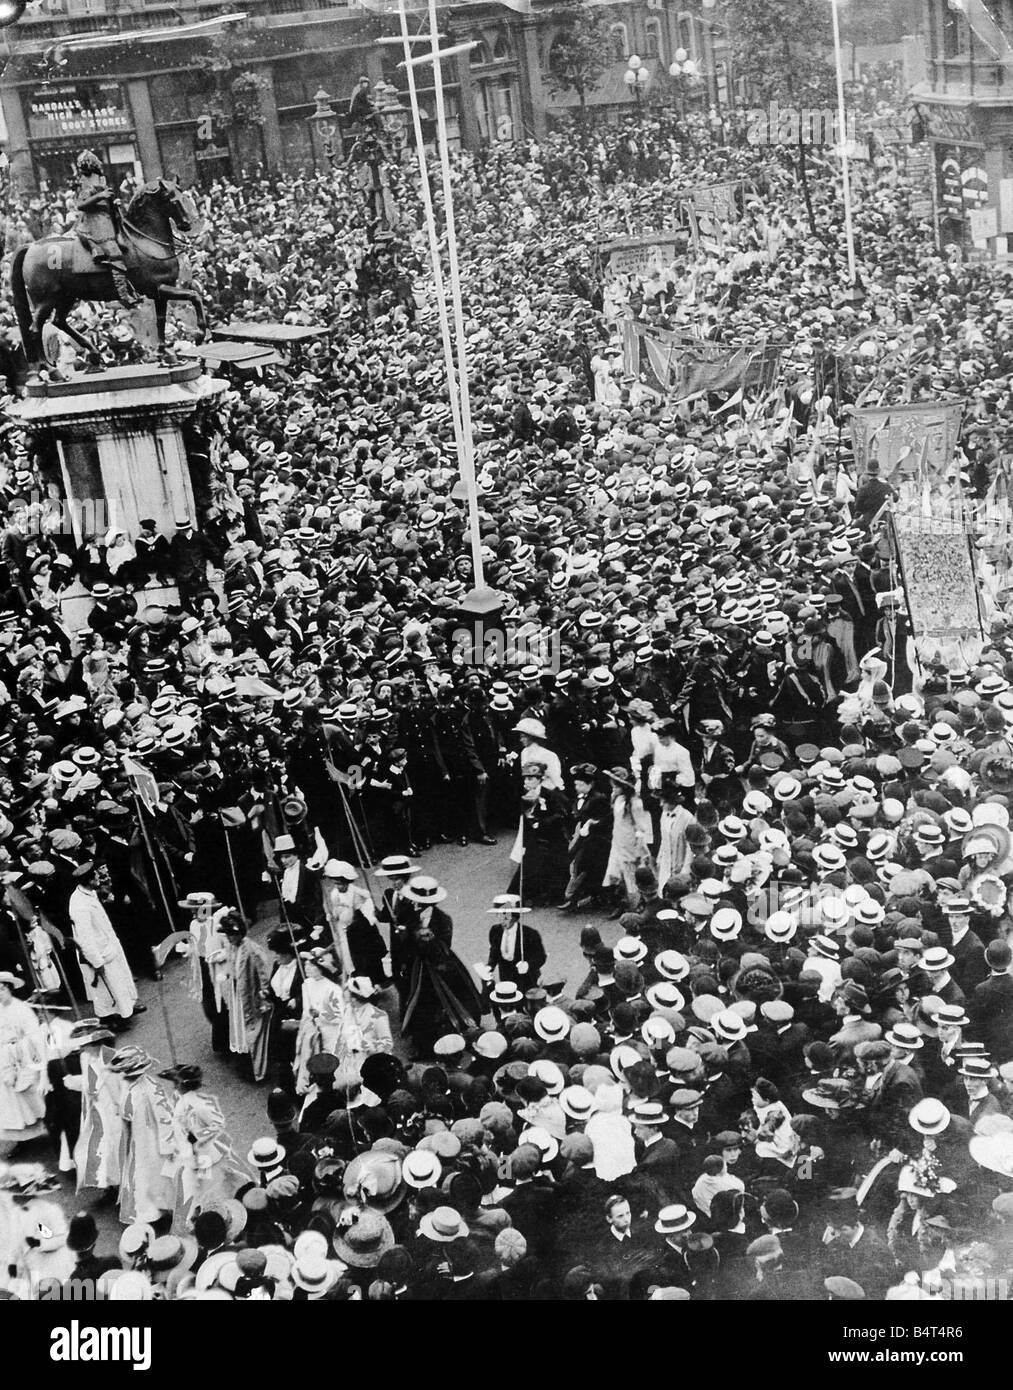 Suffragettes June 1911 40 000 strong in a Procession seven miles long march from the Embankment to the Albert Hall London The procession passing through Trafalgar Sqaure where an imense crowd had gathered 1910s Womens Rights Movement Stock Photo